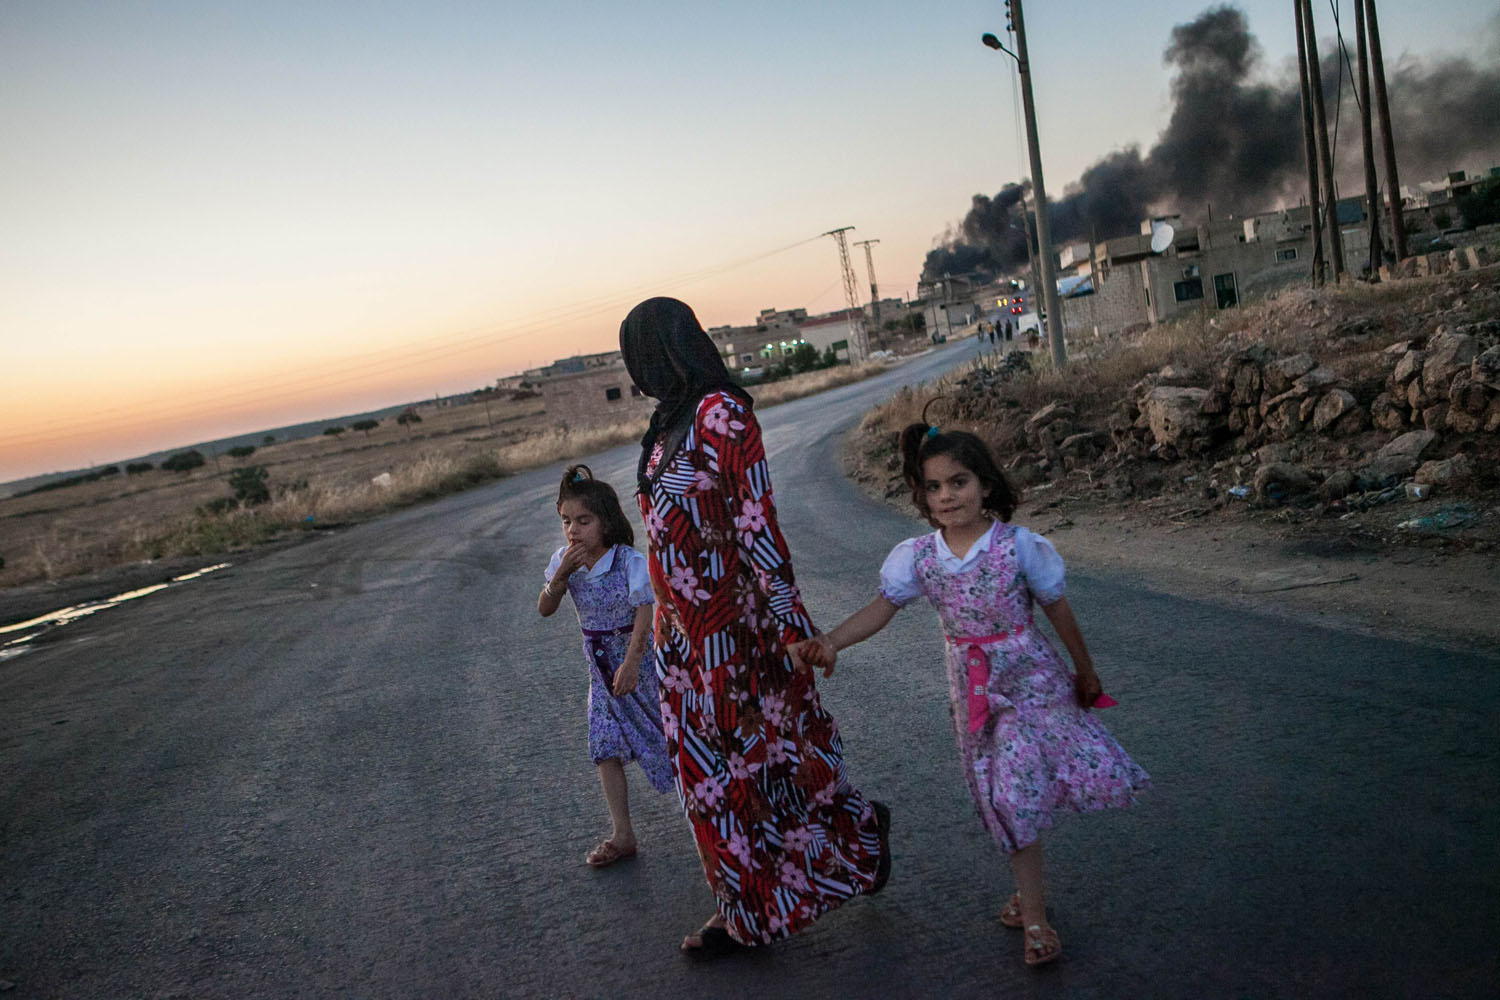 June 24, 2013. Syrian girls walk with their mother as she turns to look at smoke billowing from three mortar shells dropped on the town of Al-Bara in the northwestern province of Idlib.